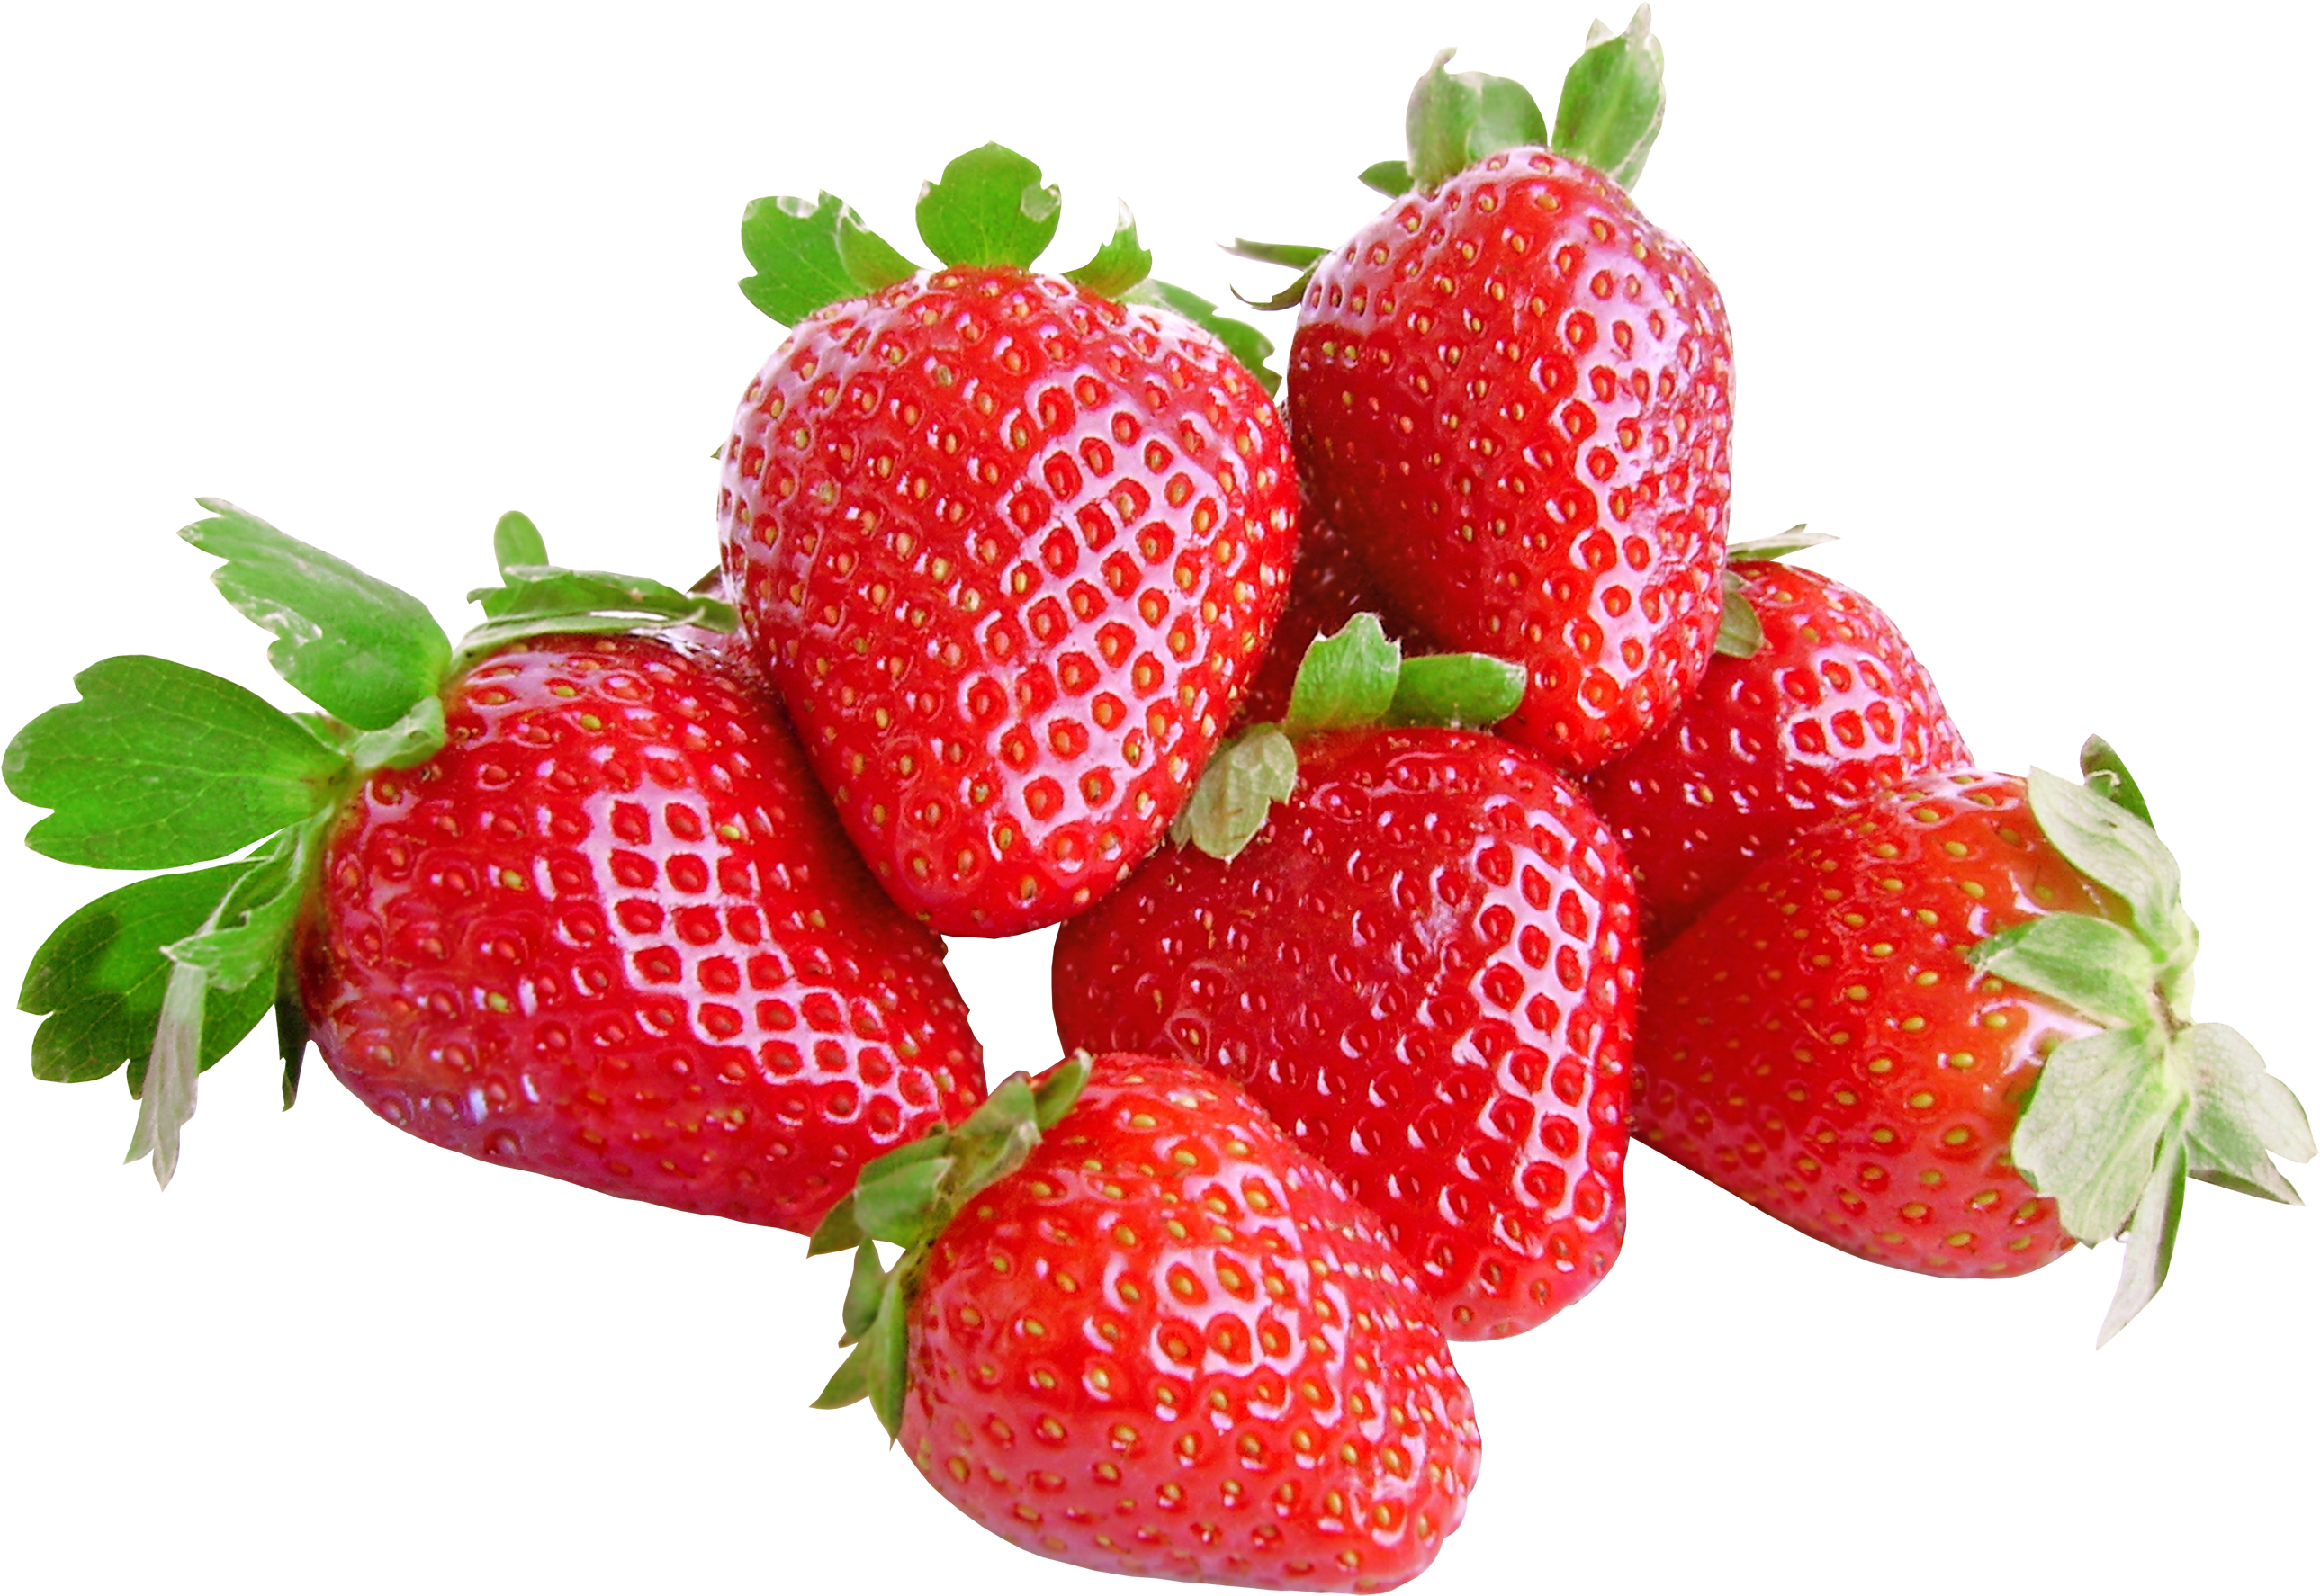 Strawberry - - Food On A White Background (2689x1920)